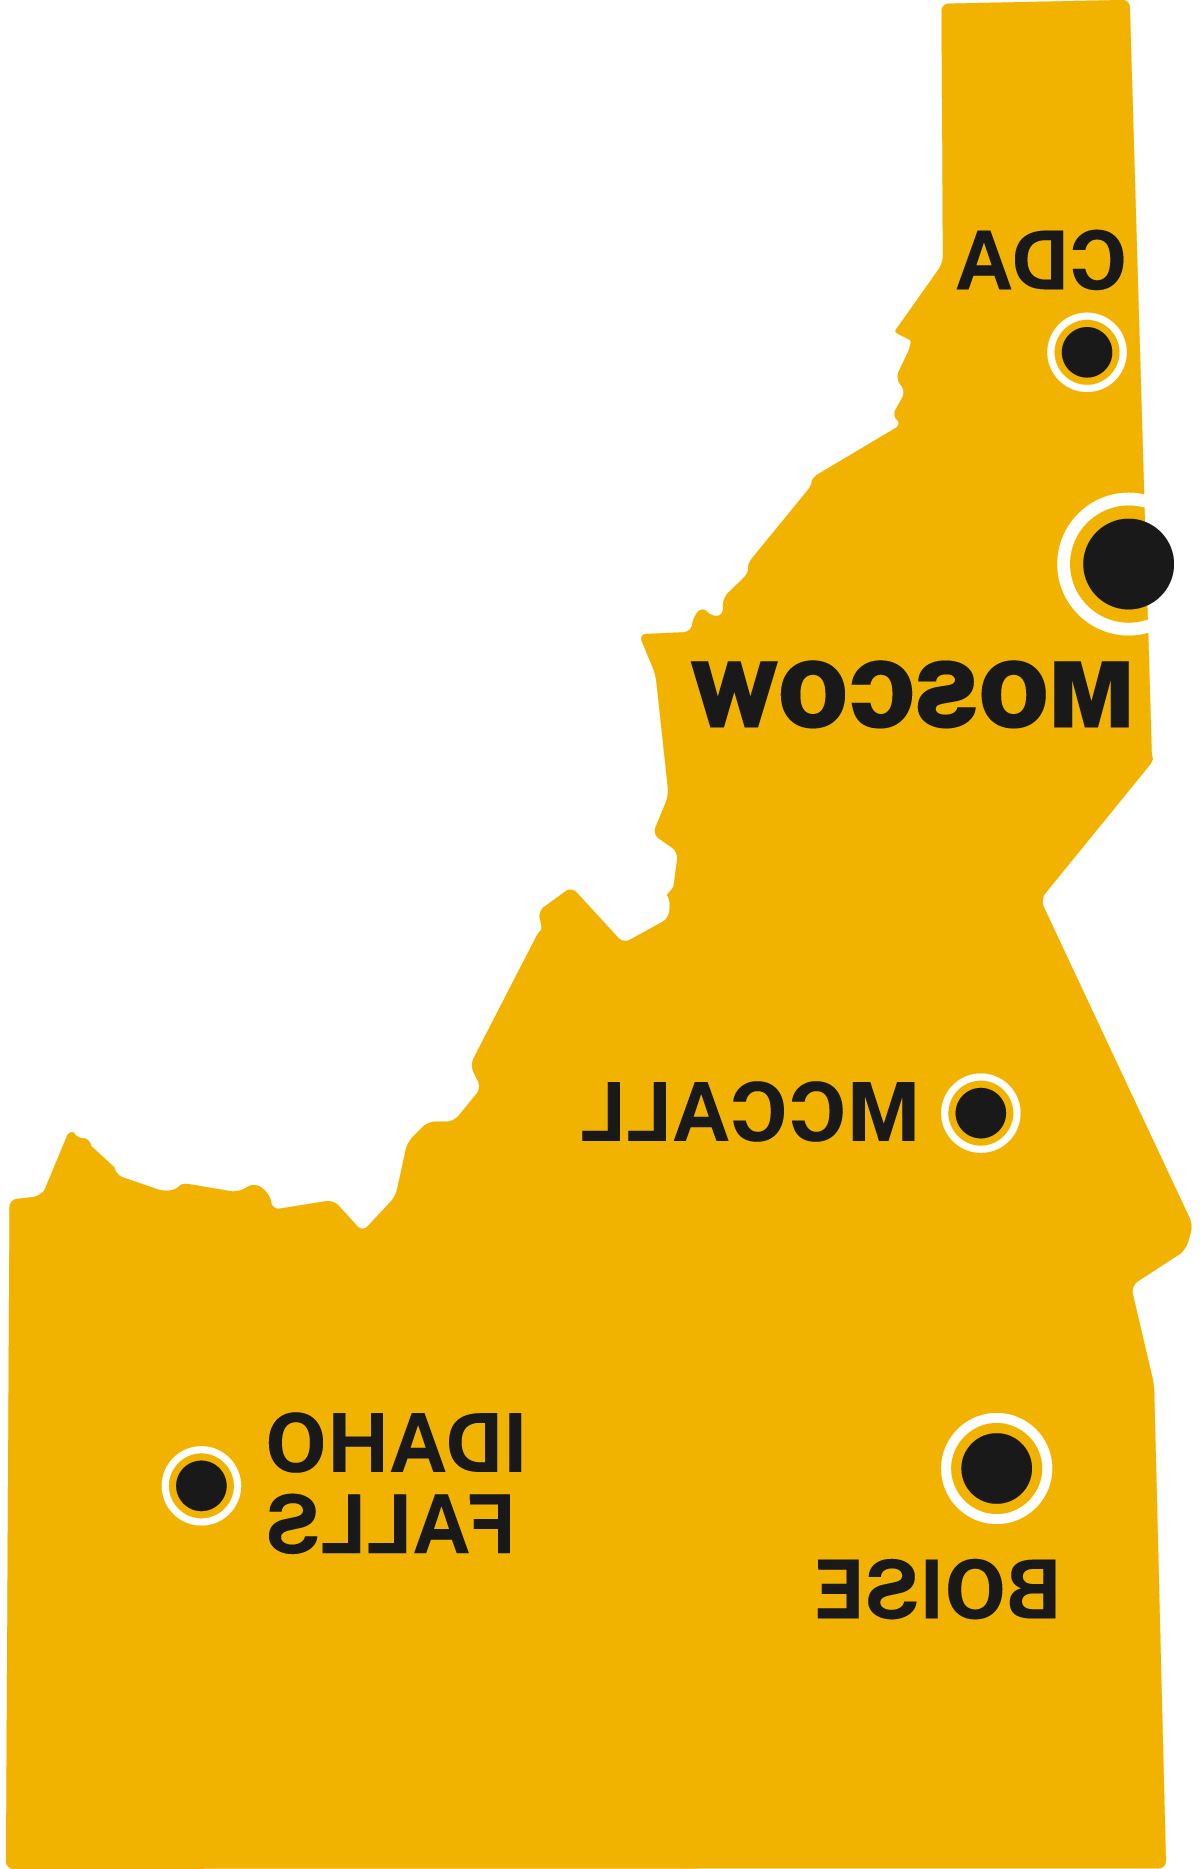 Graphic representation of Idaho and its campuses, research and extension centers in Coeur d’Alene, 莫斯科, 考尔, 博伊西 and Idaho Falls.